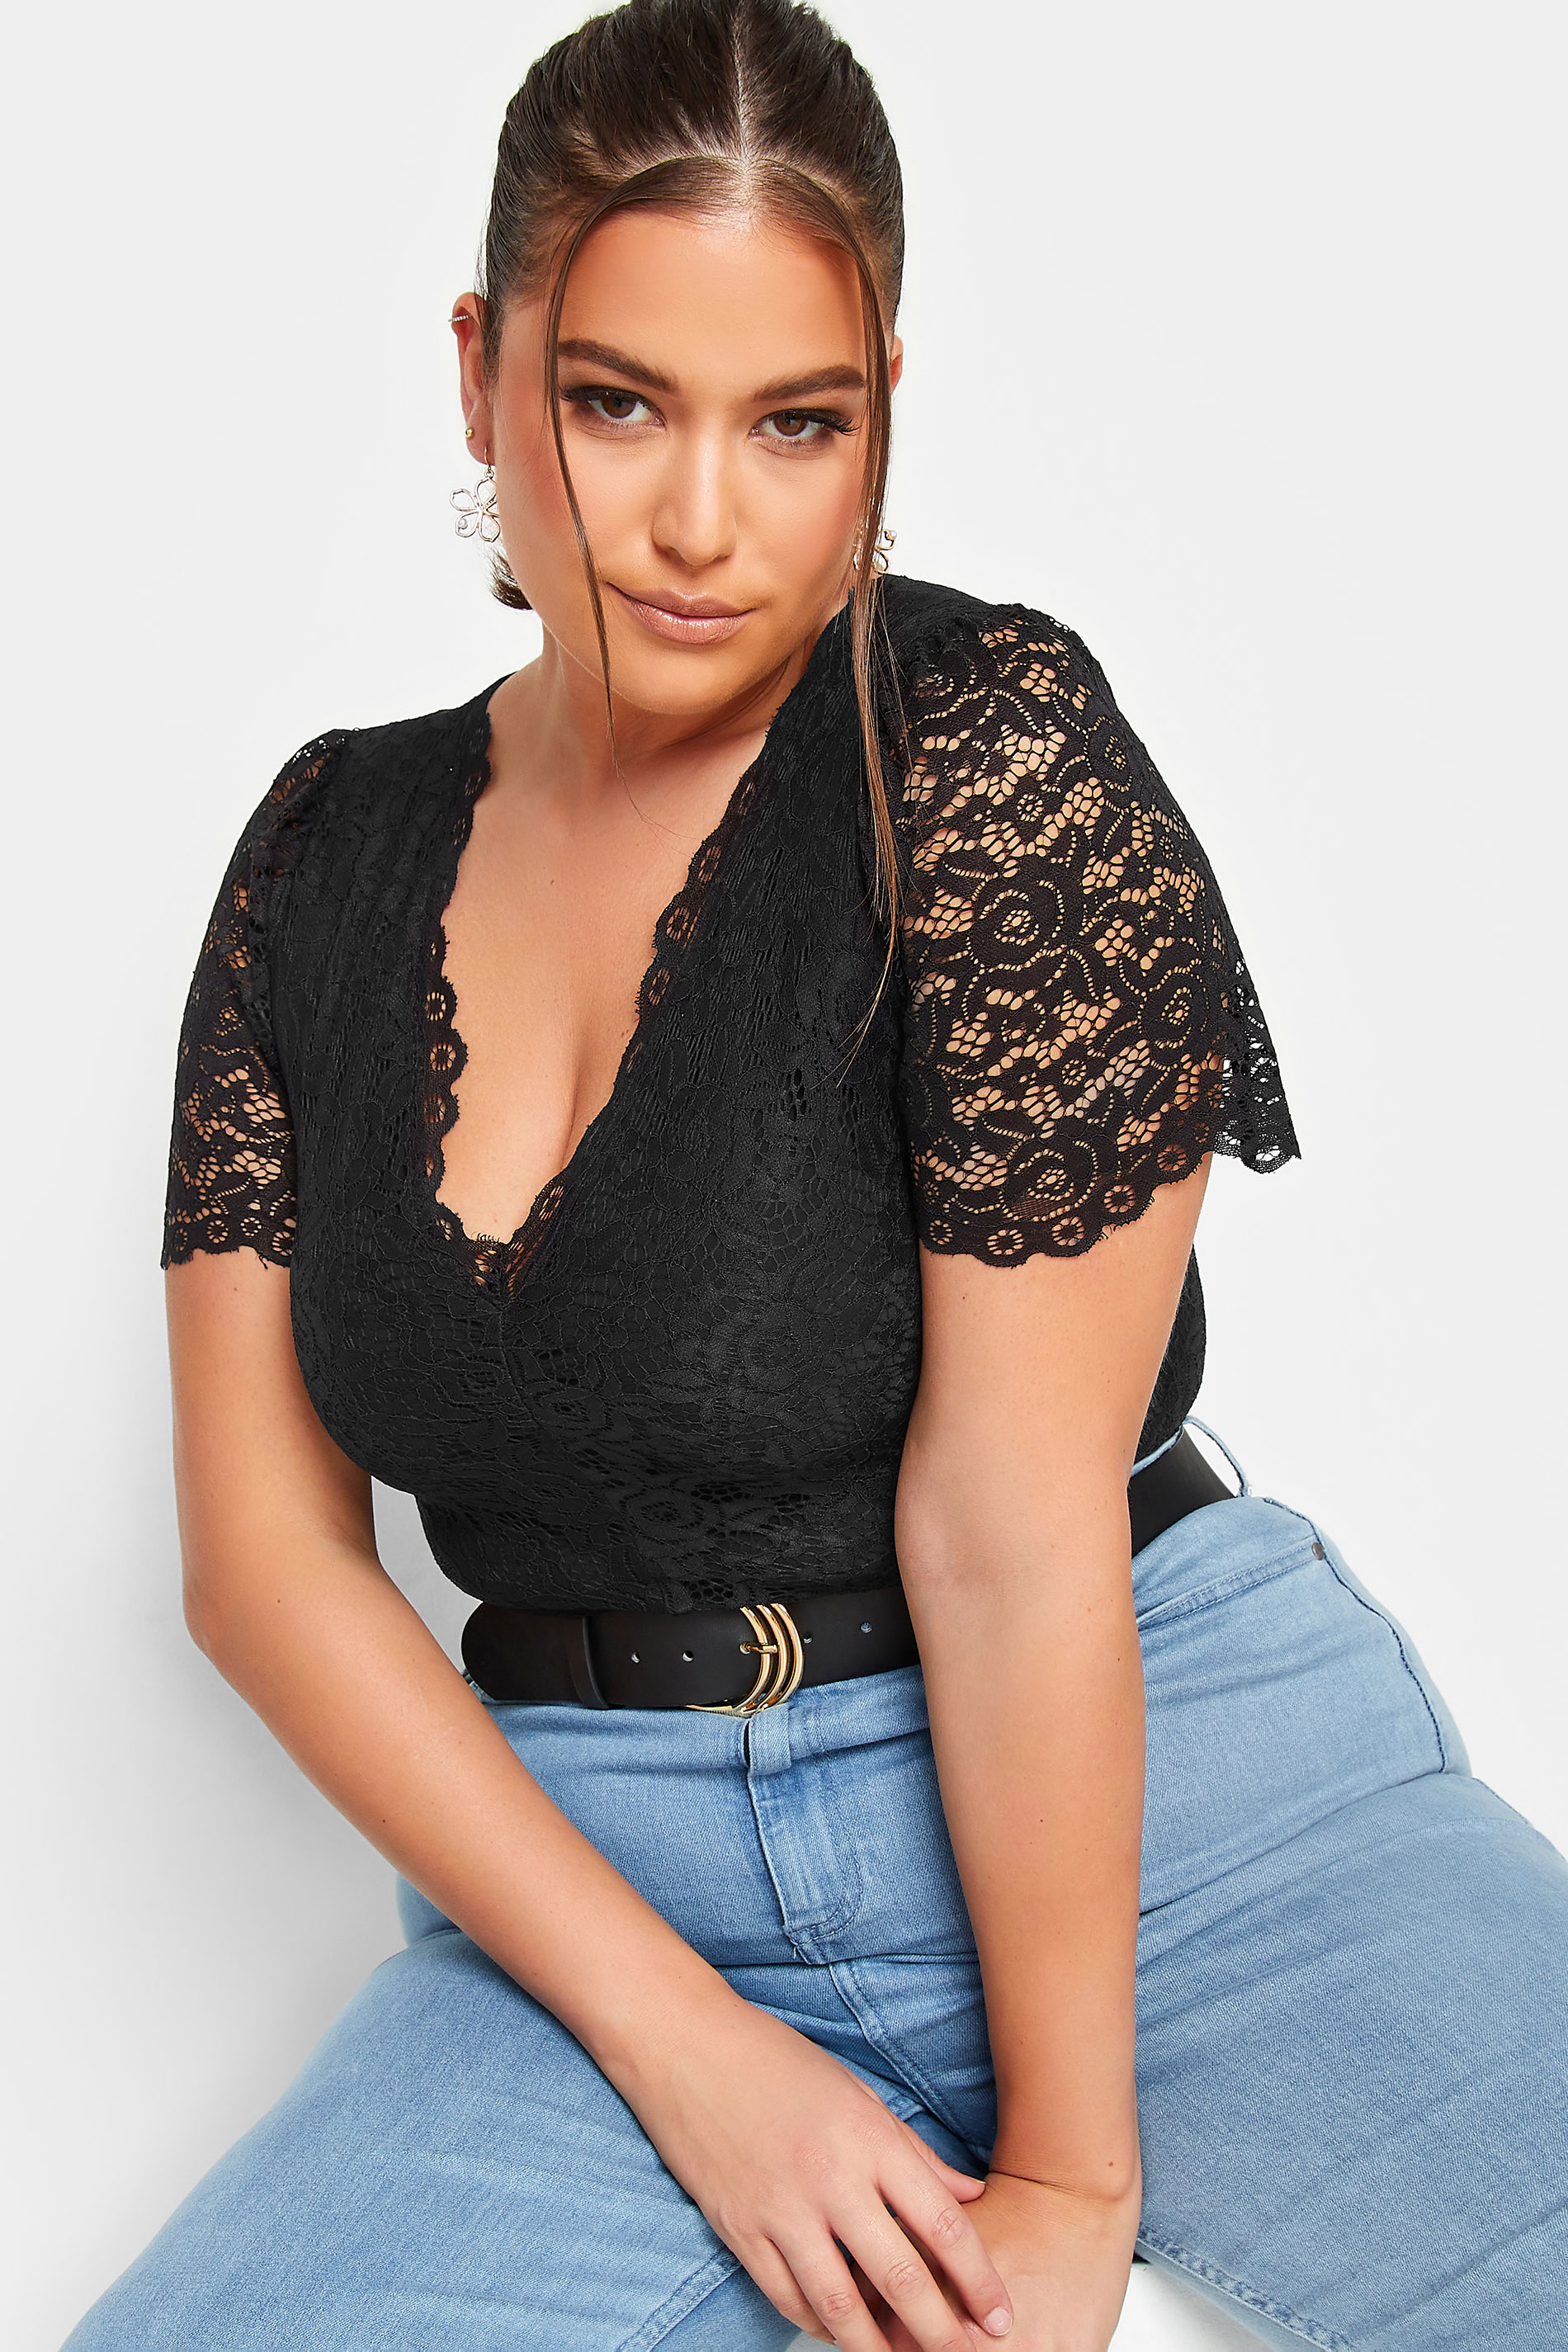 https://cdn.yoursclothing.com/Images/ProductImages/0aa3147b-4447-45_215846_D.jpg